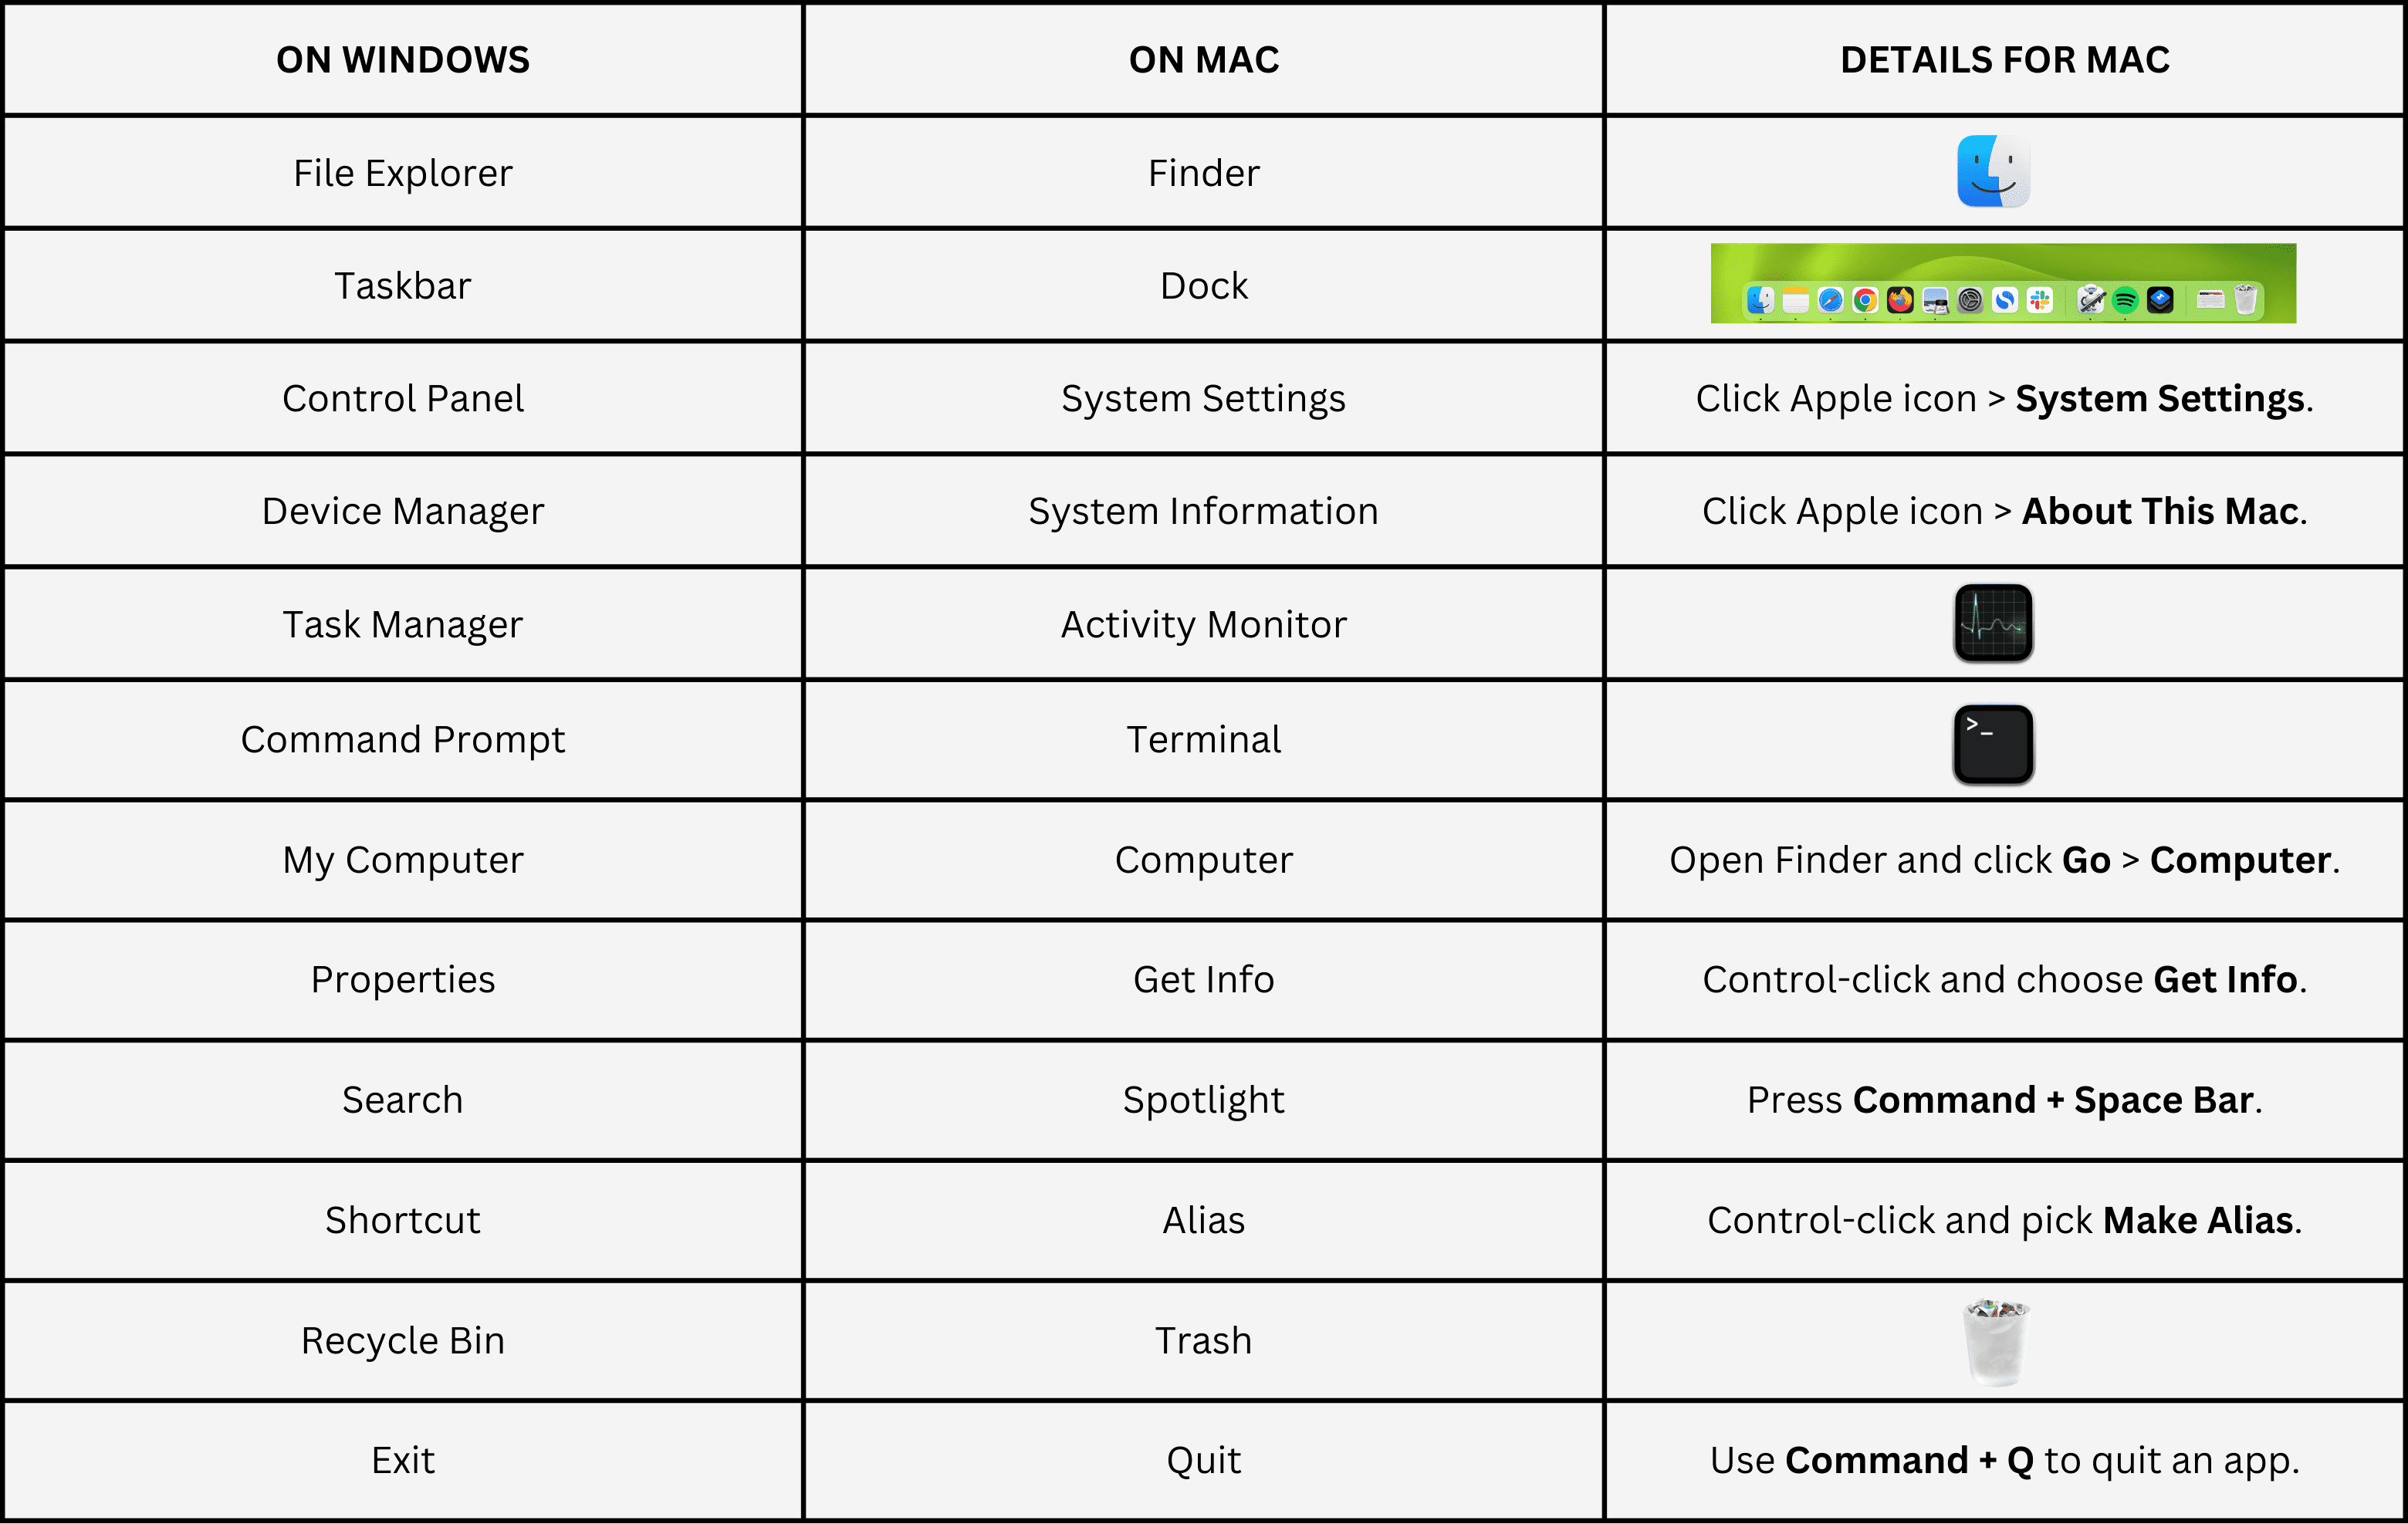 A table showing names of settings and their locations on Windows and Mac